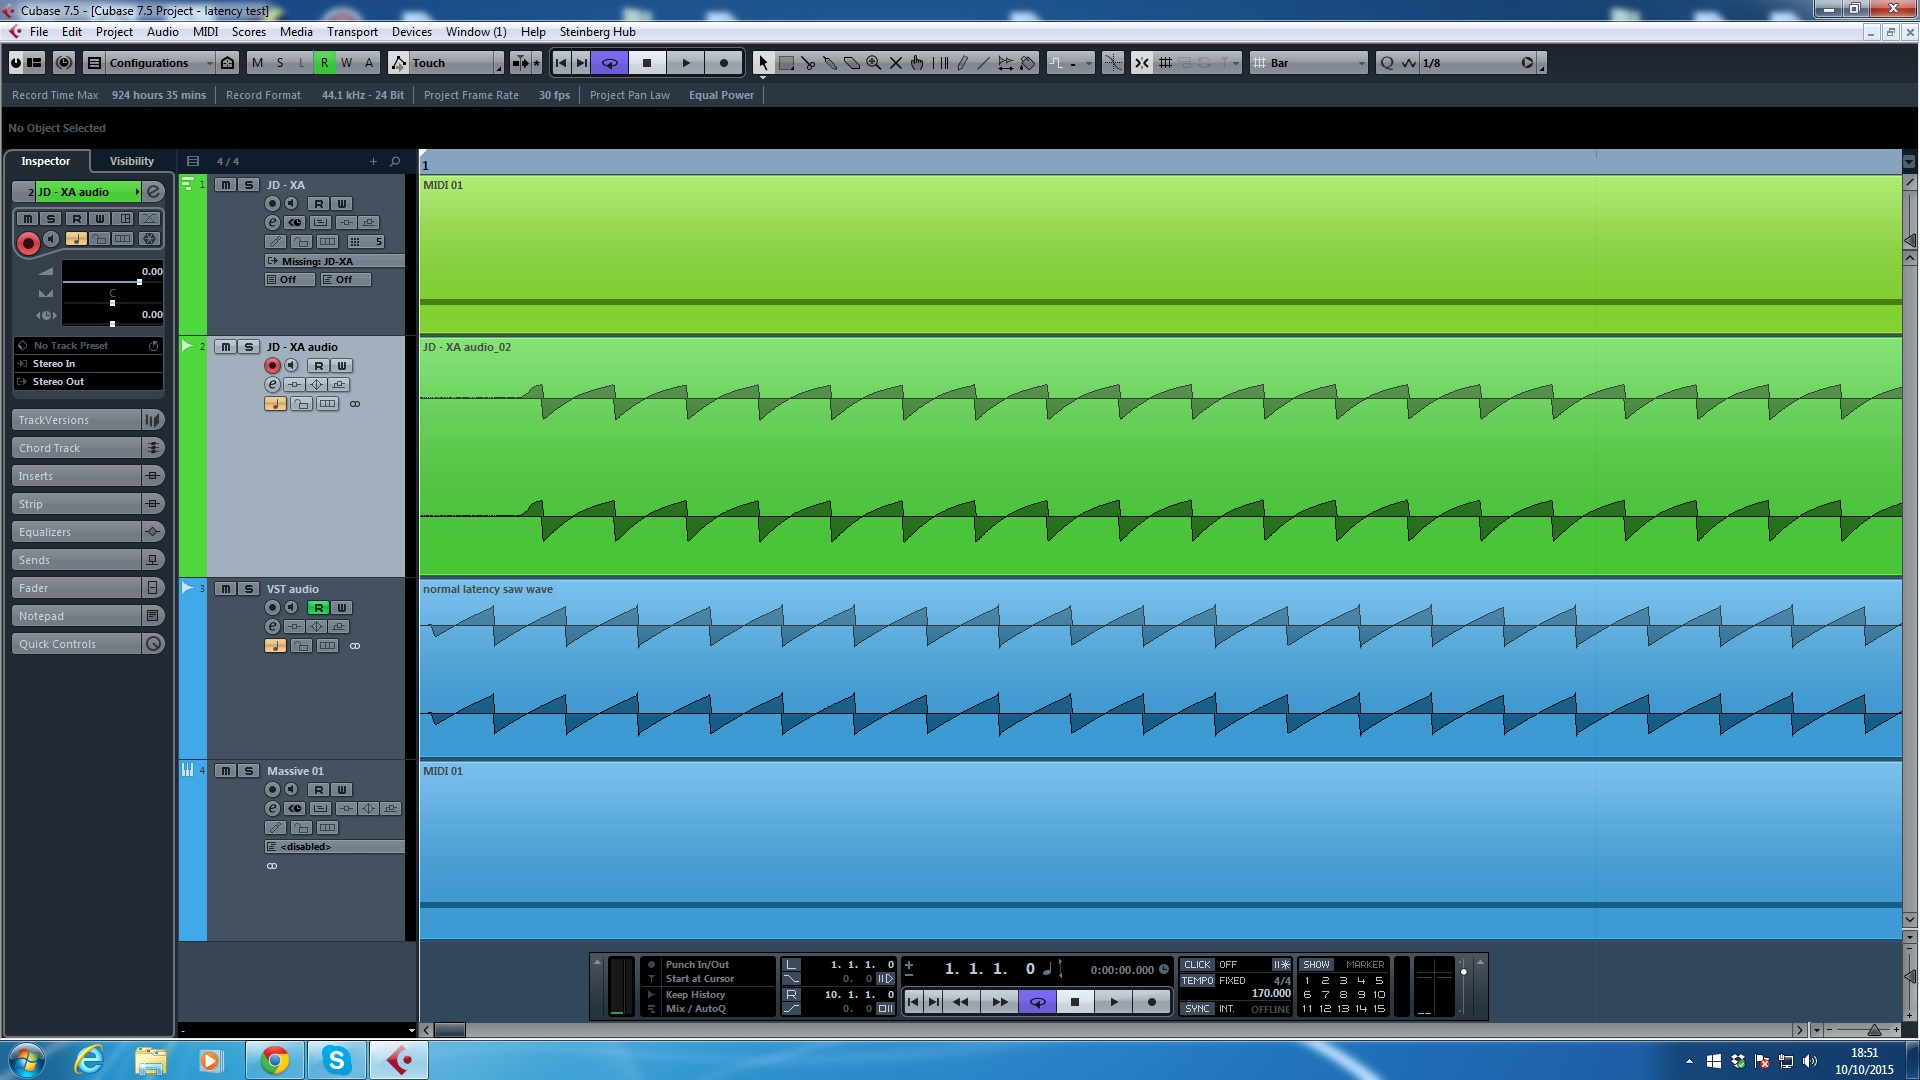 The JD-XA is in green and a normal VST is in blue.